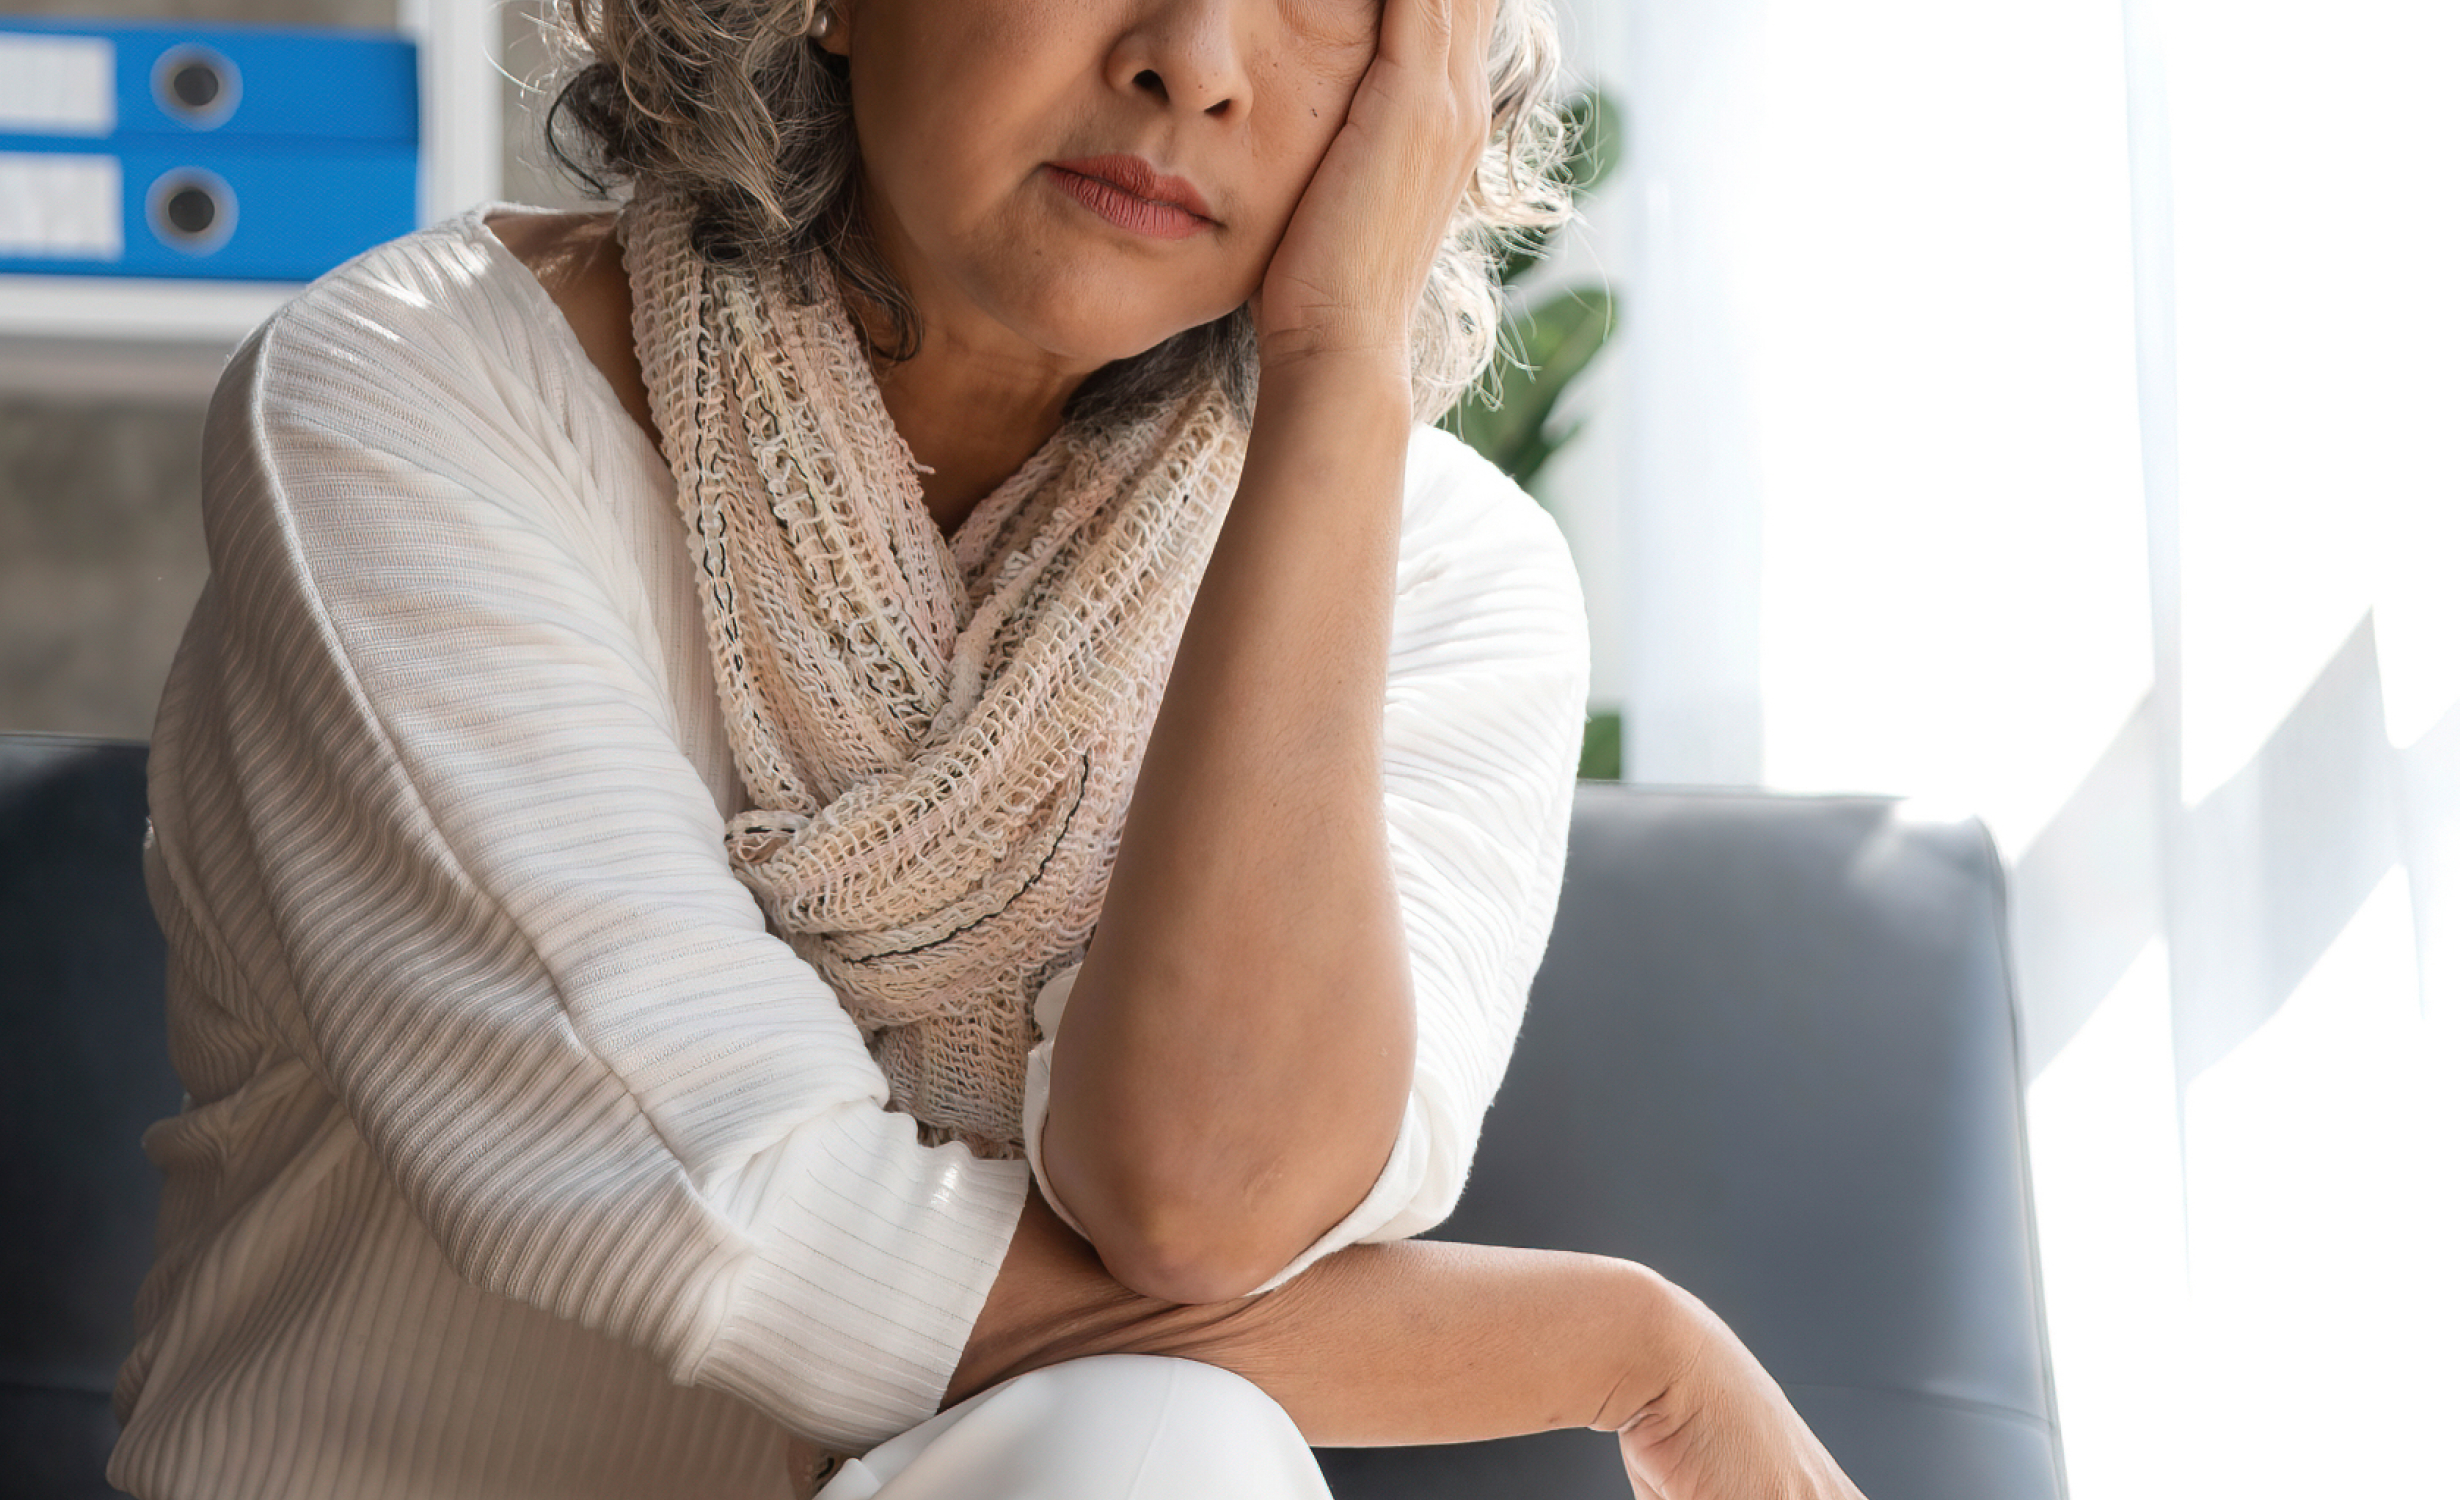 A mature woman sitting on a couch, holding her head with a concerned expression, depicting symptoms of menopause.